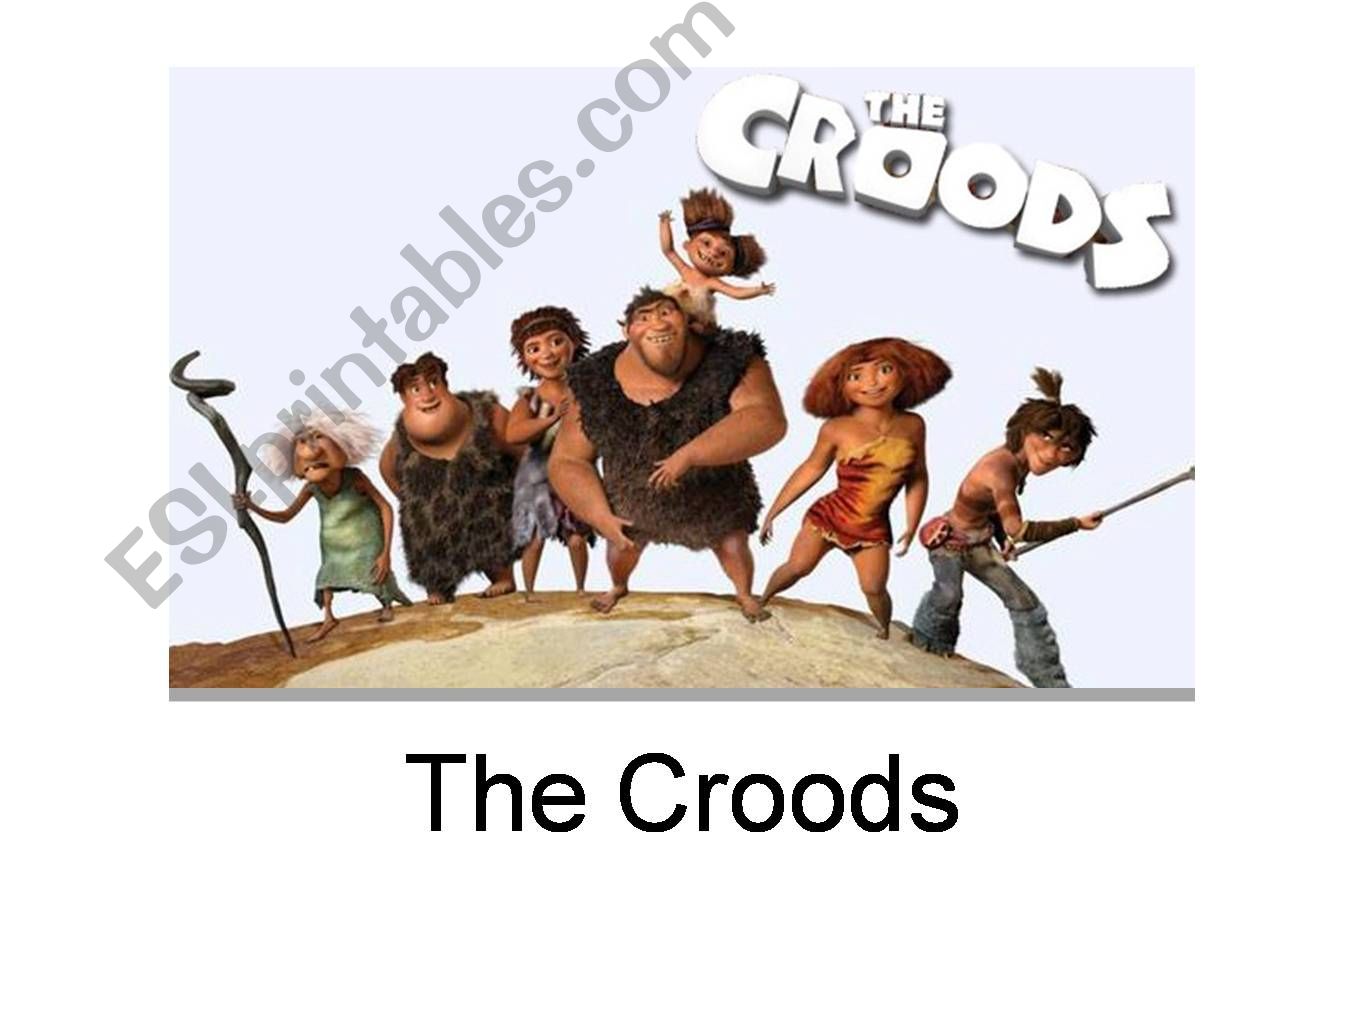 The Croods - listening comprehension